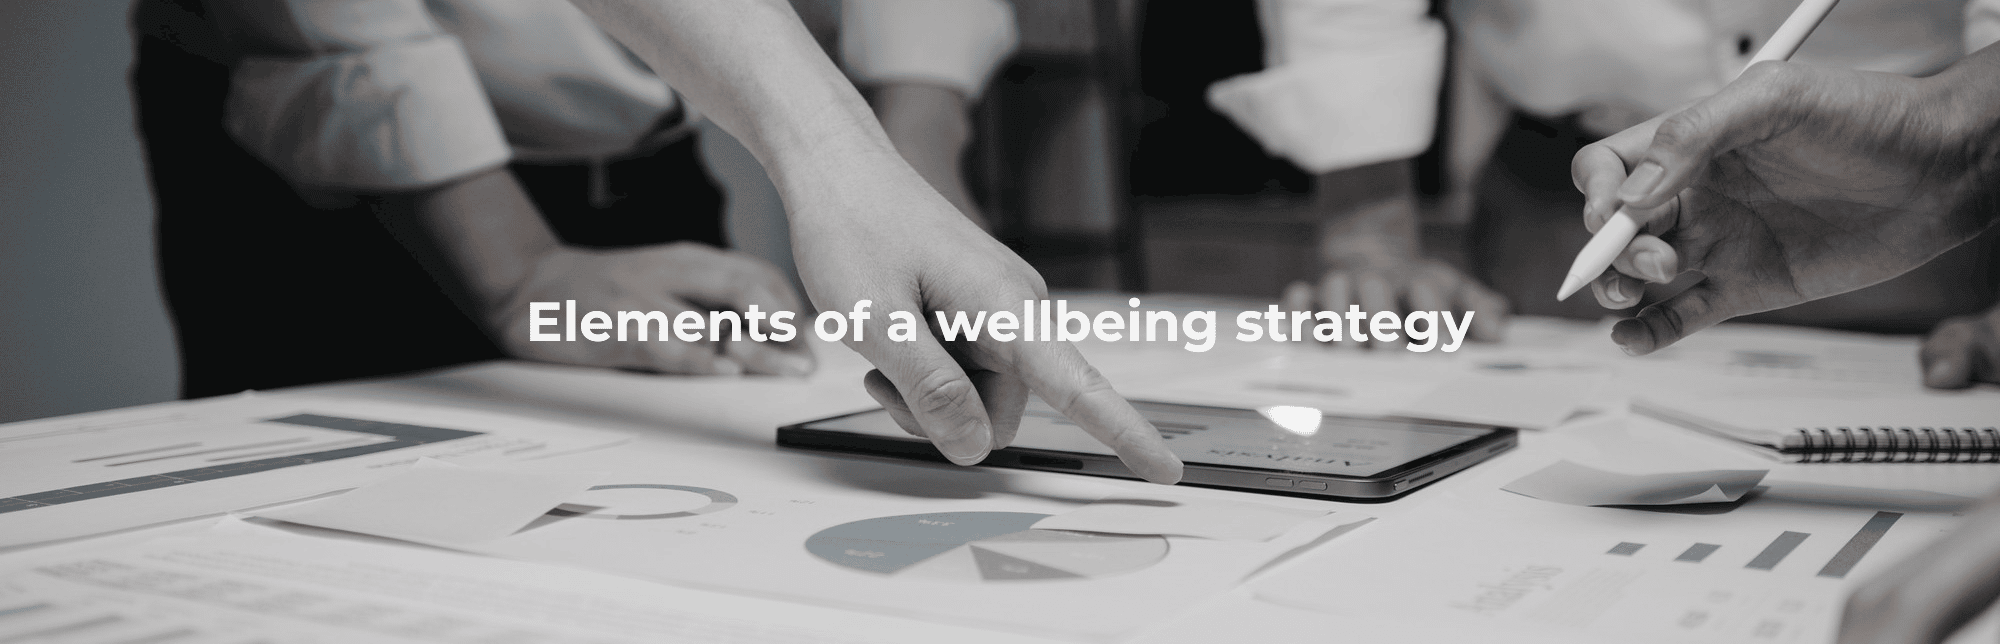 Elements of a wellbeing strategy